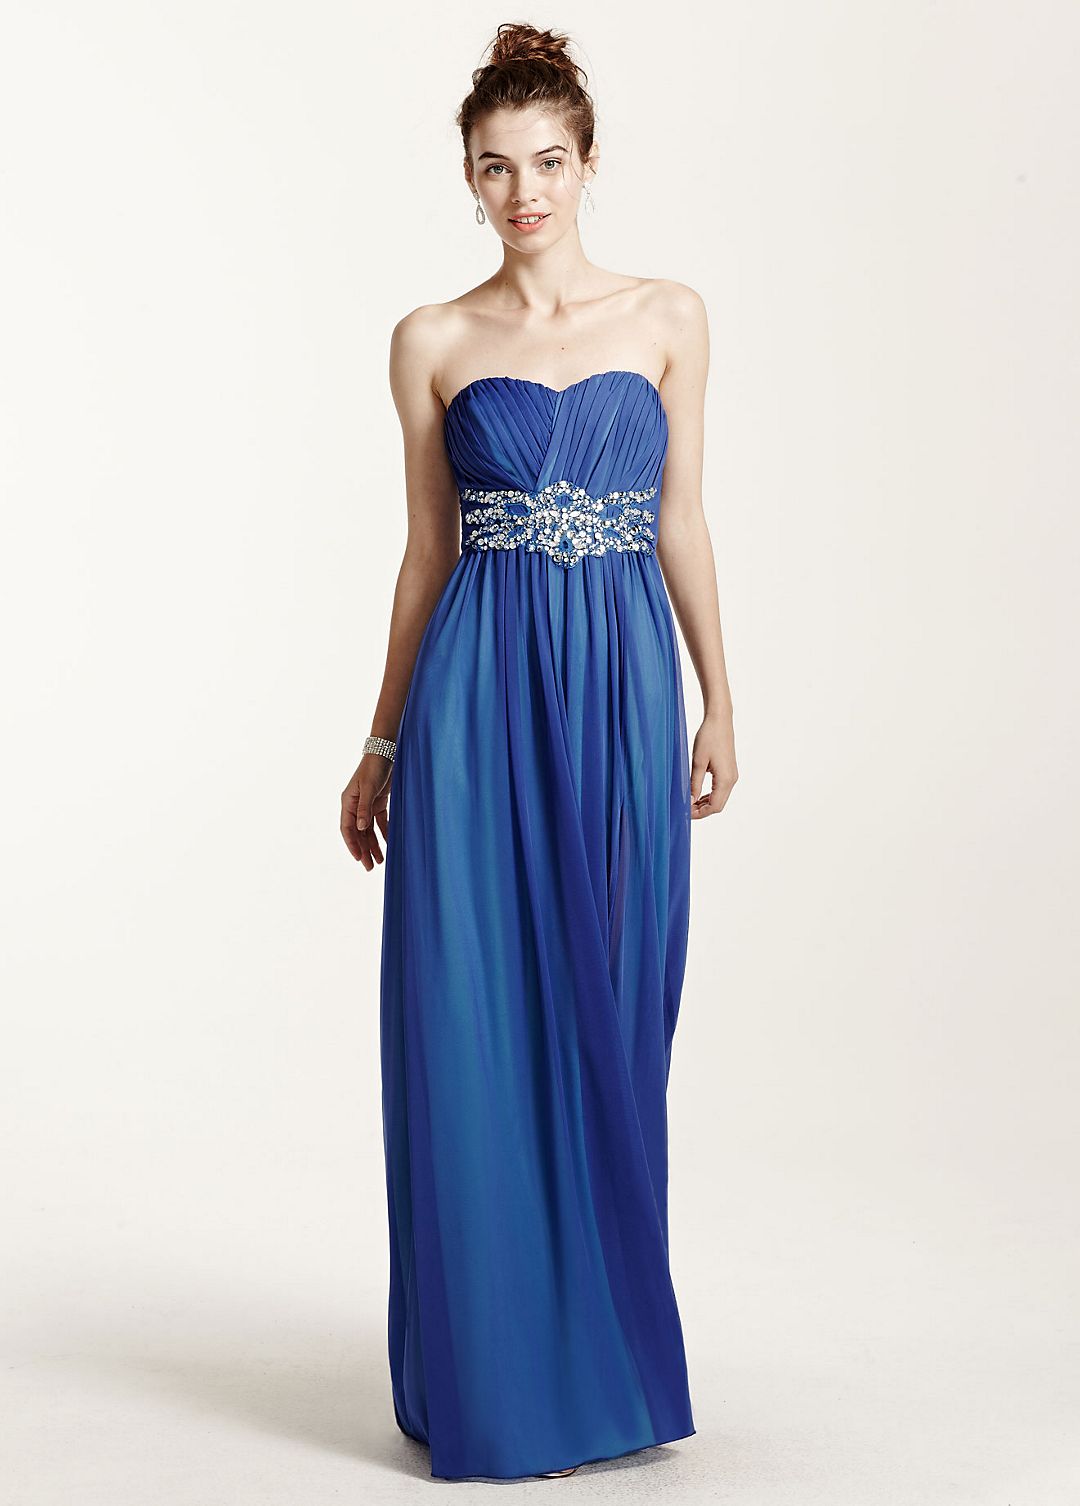 Long Strapless Mesh Dress with Beaded Waist Image 1